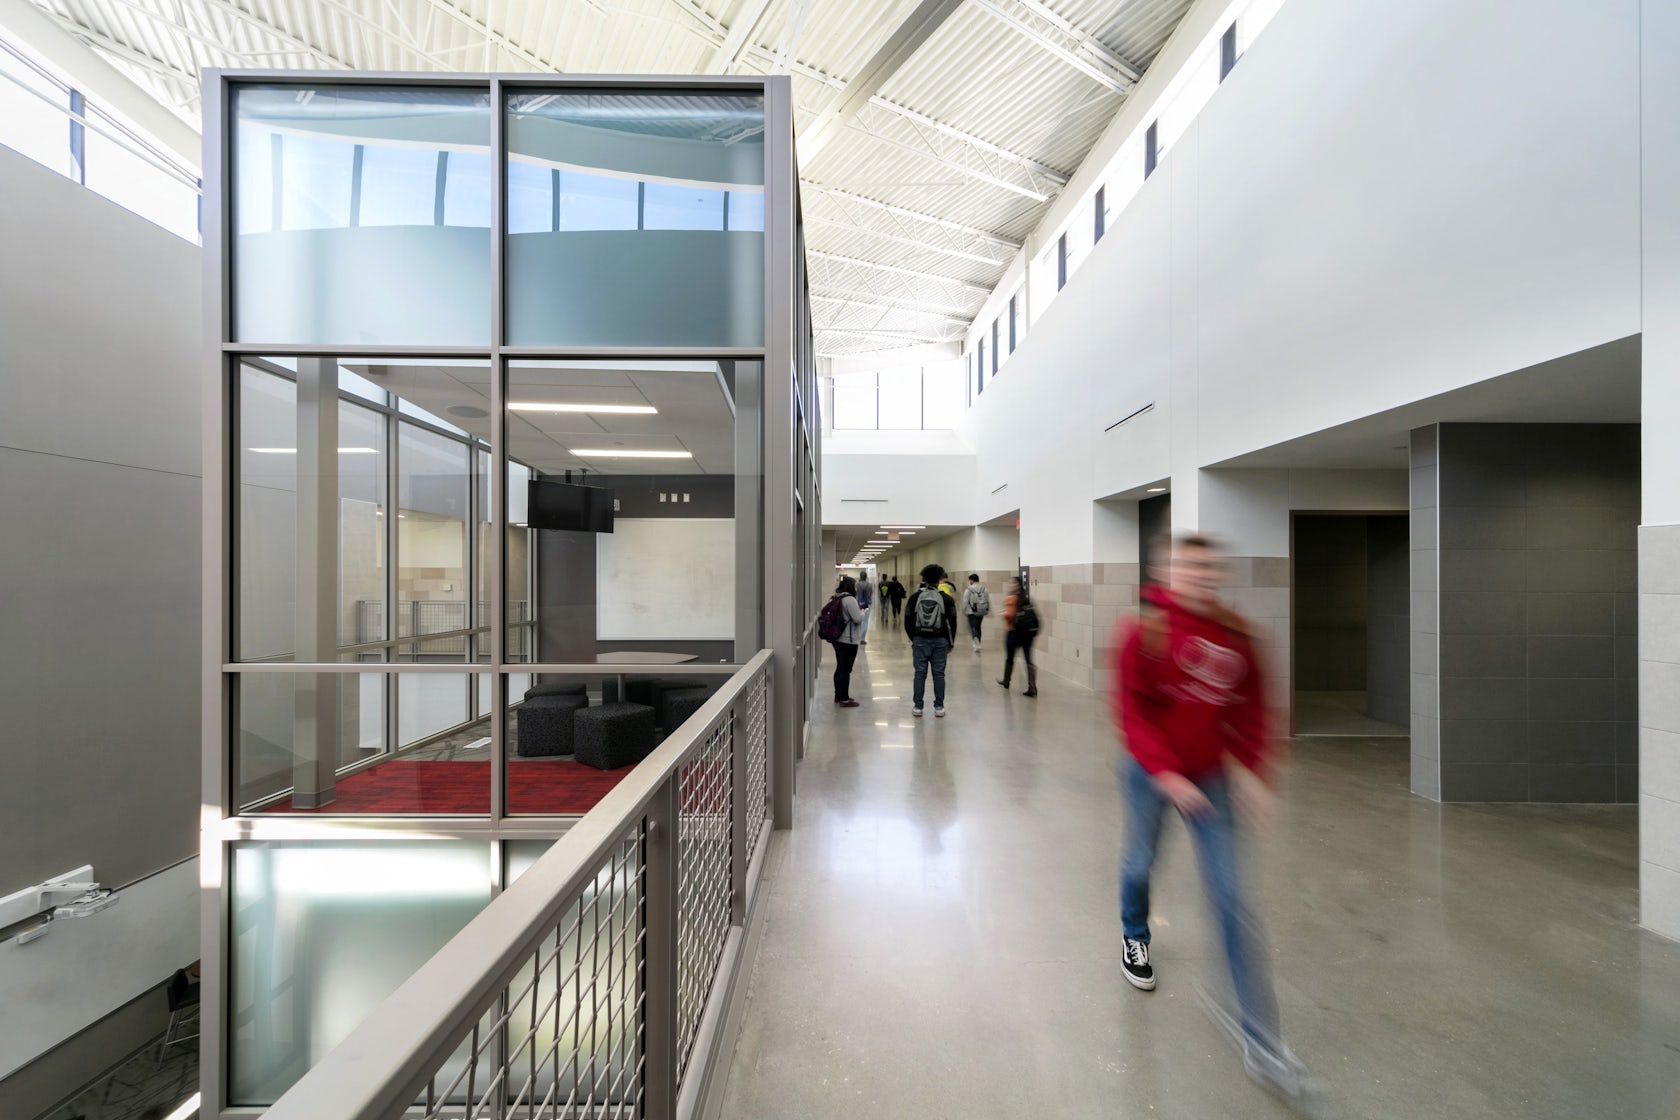 ray-braswell-high-school-by-vlk-architects-architizer